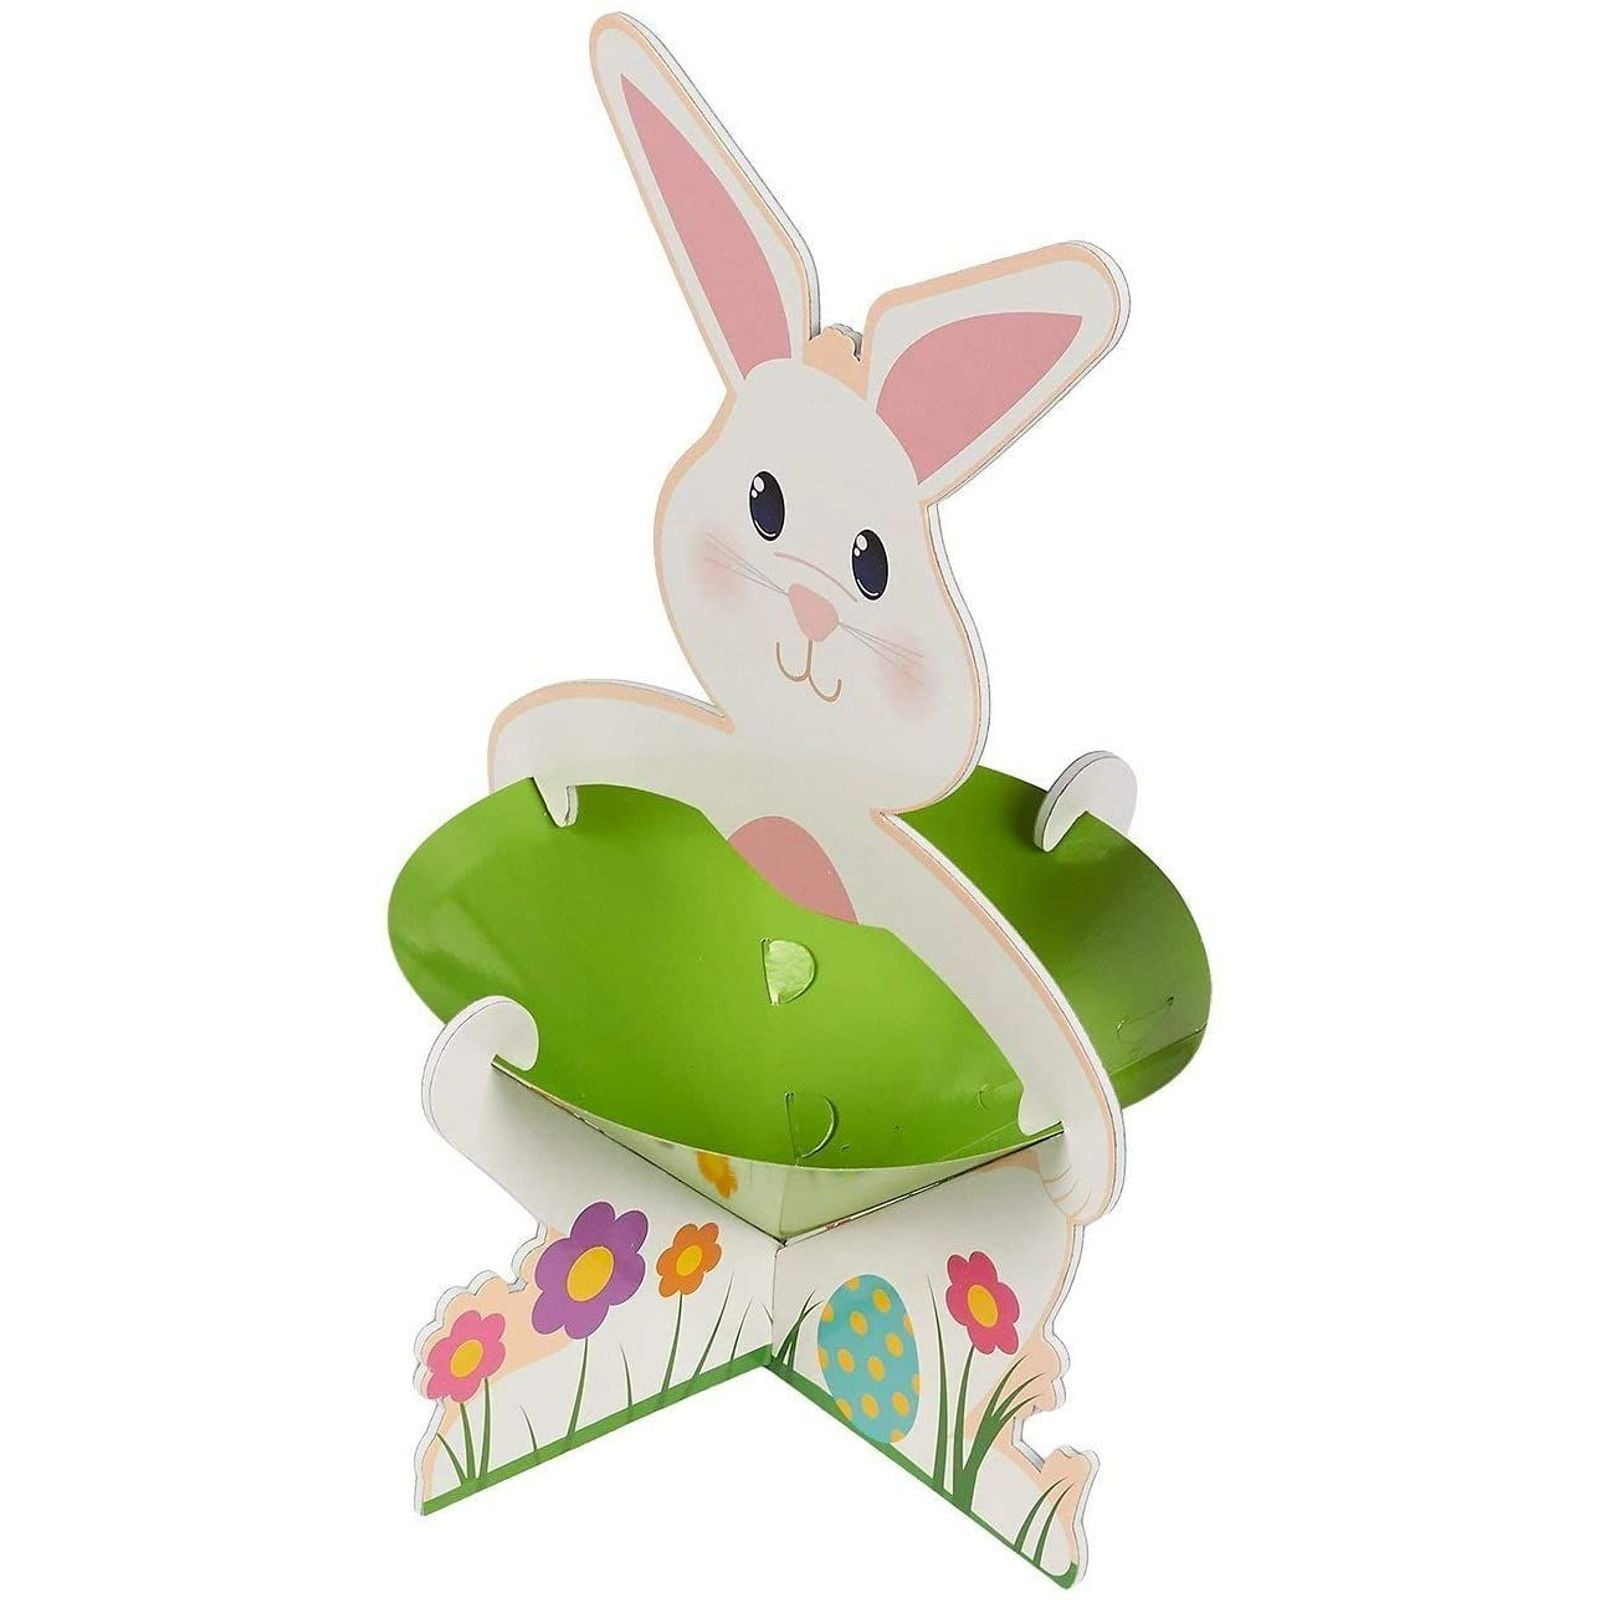 Eggs Egg & Candy Holder Set Holds Chocolate 8.7 X 12.7 X 8.7 inches Juvale Great for Easter Party Favors Table Displays Easter Themed Cups with Stand Candy 2 Pack Easter Party Decorations 